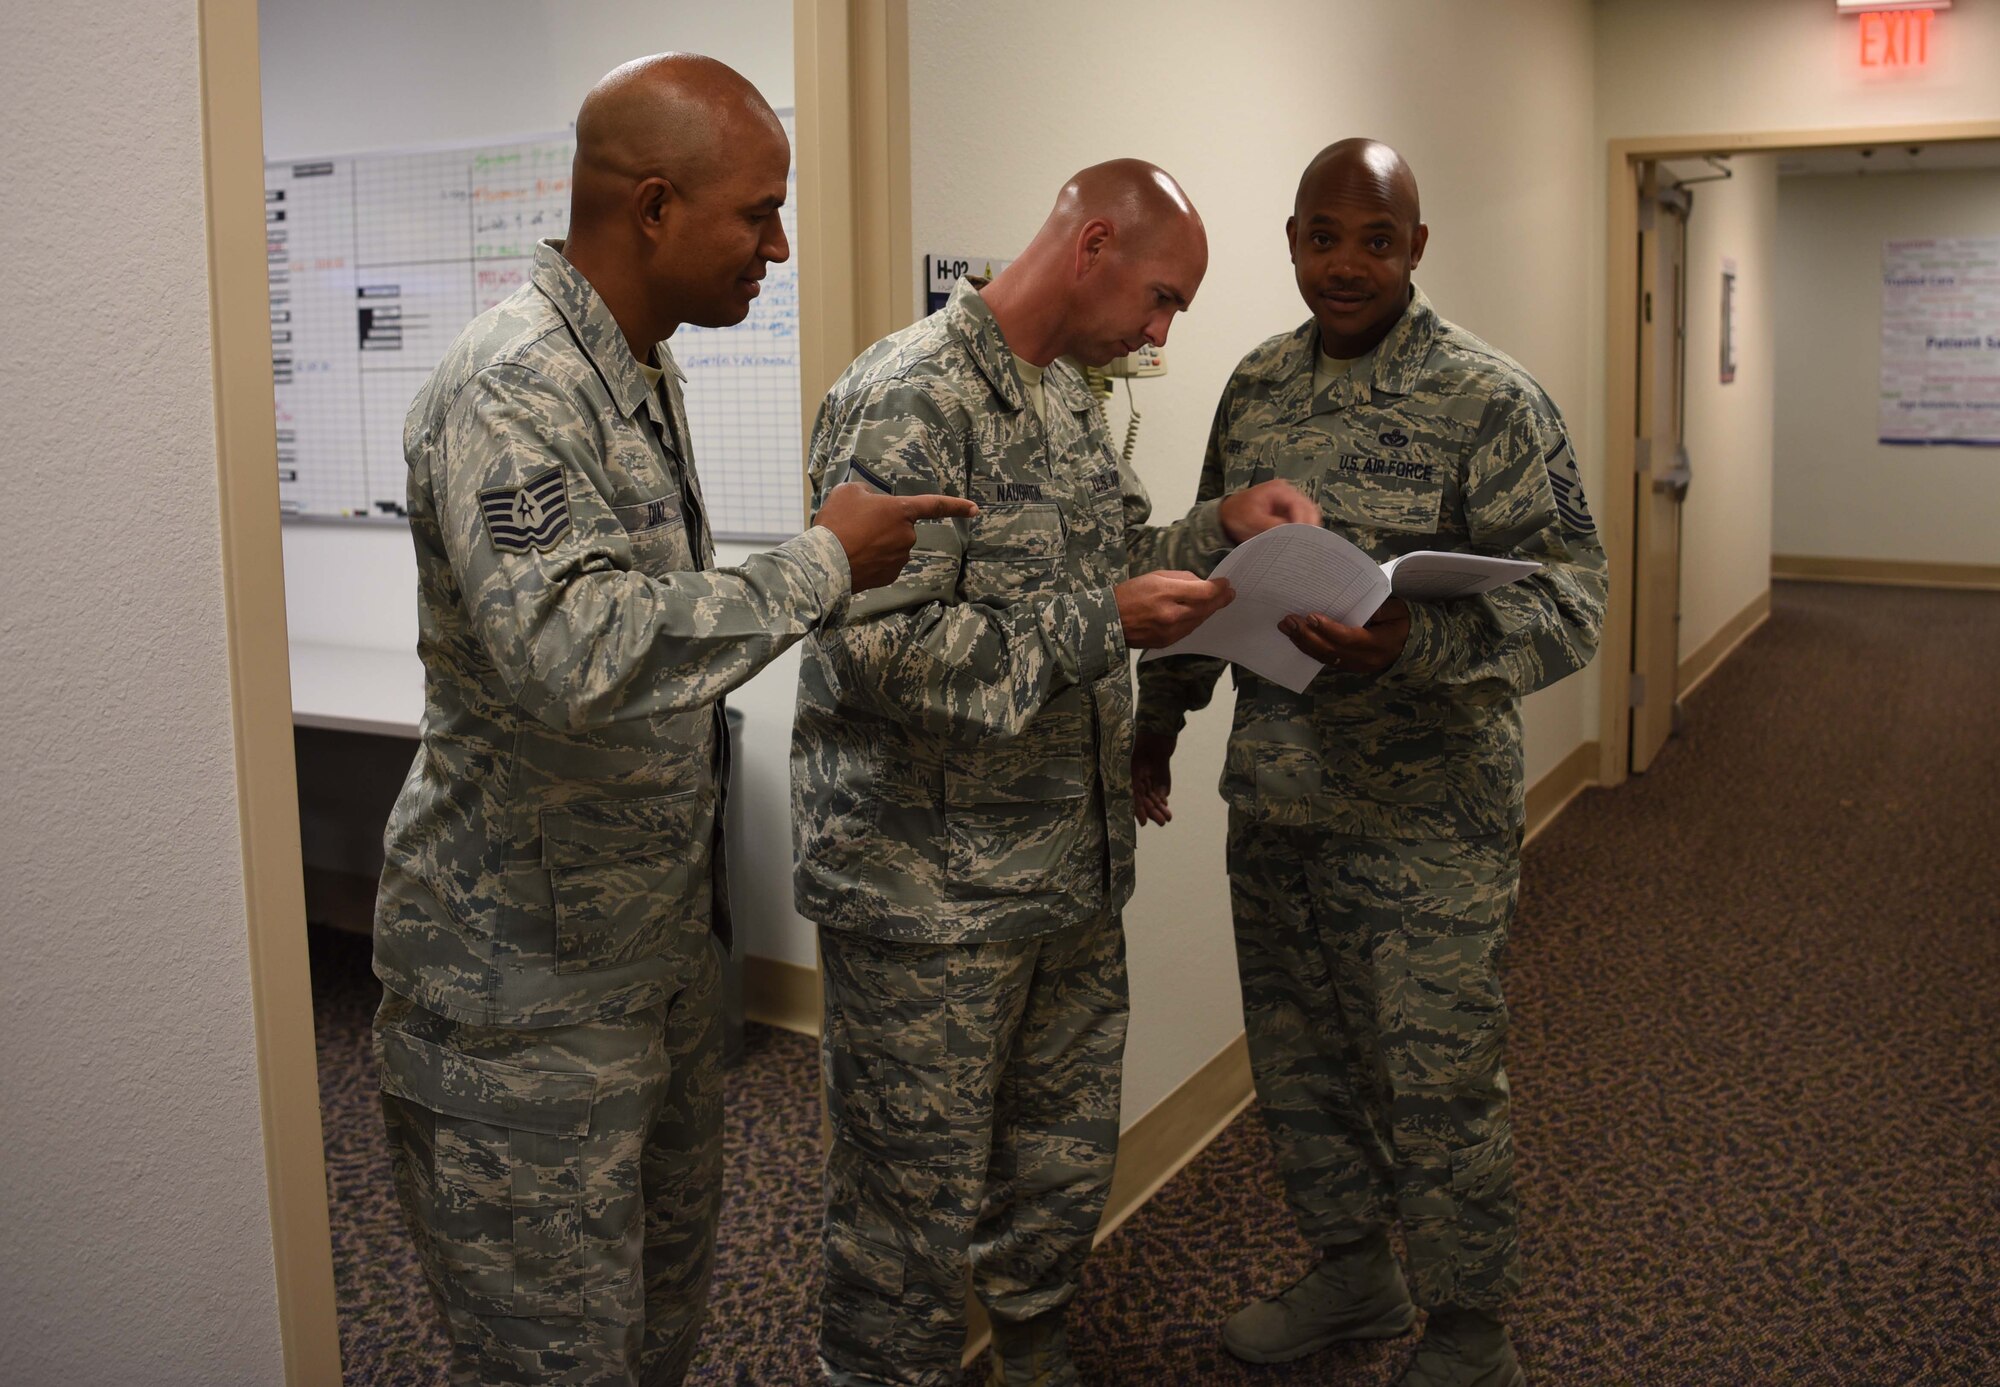 Master Sgt. Thee Thorpe, 90th Medical Group First Sergeant talks to 90th Medical Readiness Flight chief Master Sgt. Jeffery Naughton, and NCO in Charge Tech. Sgt. Josue Diaz June 6, 2018, in the 90th Medical Group Building on F.E. Warren Air Force Base, Wyo. Thorpe schedules time each day to get up and walk around to meet and chat with the people in his group to build trust and confidence between him and his fellow Airmen. Thorpe suggests it will improve leadership skills, personal skills and communication.  (U.S. Air Force photo by Airman 1st Class Braydon Williams)